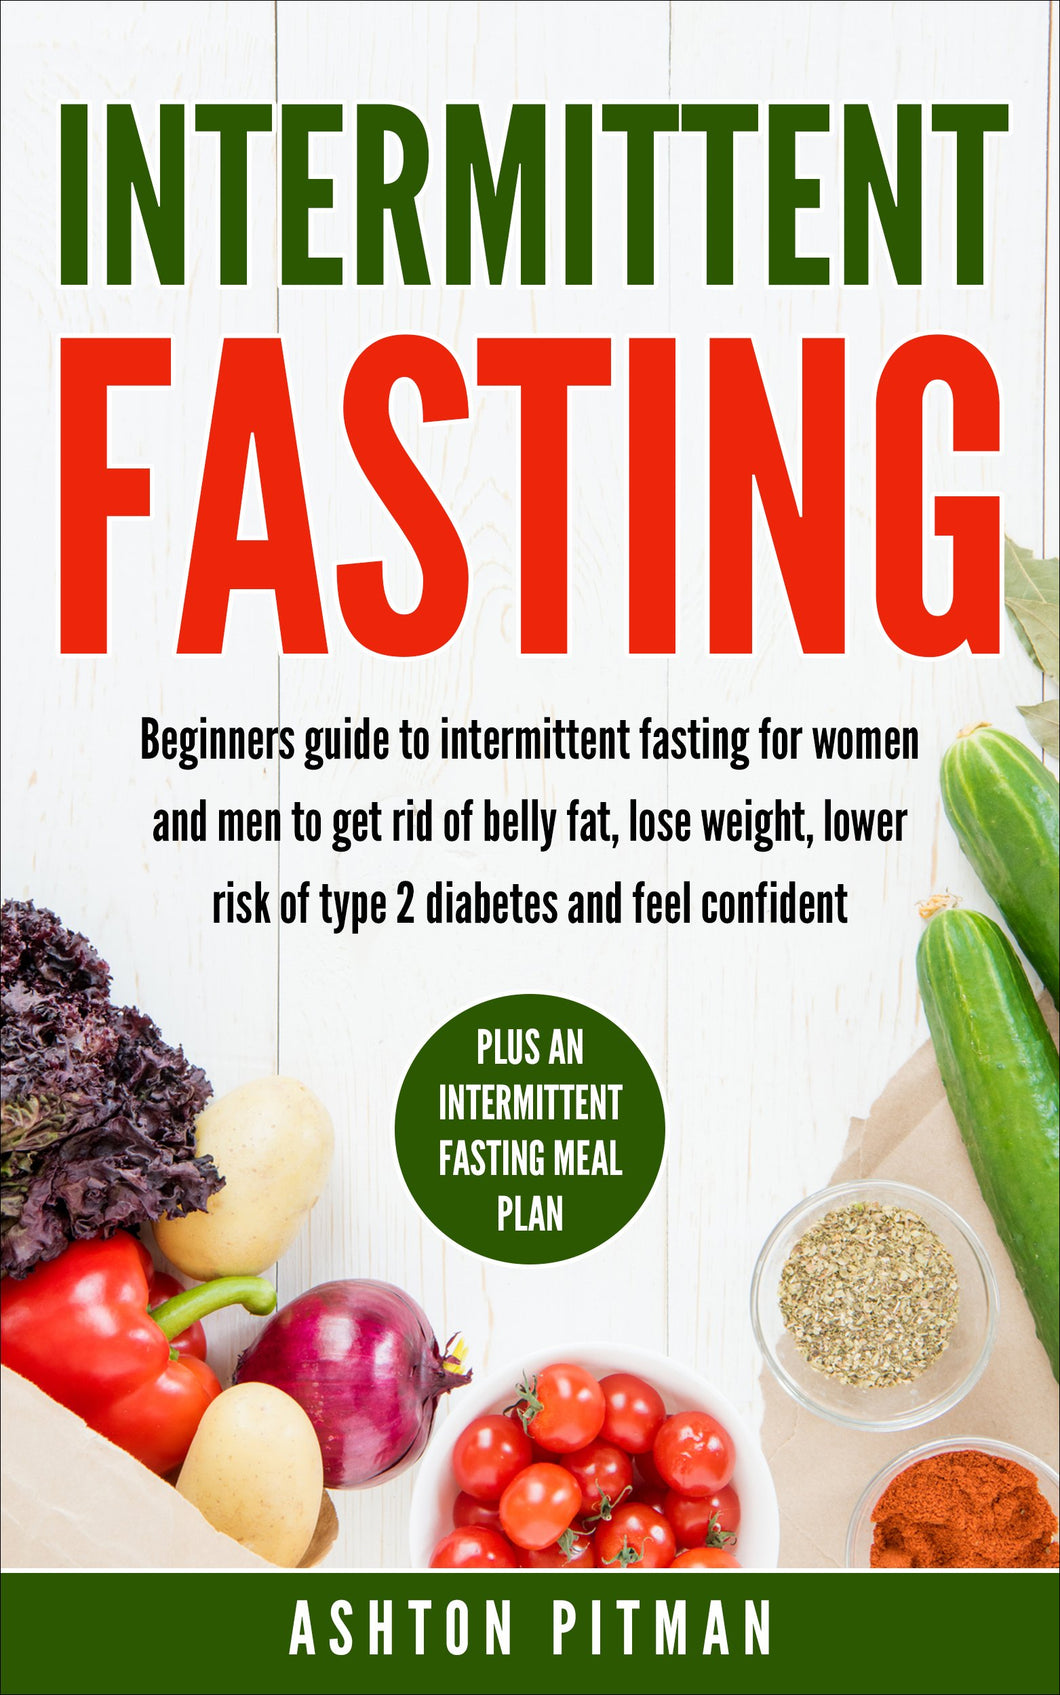 Intermittent Fasting: Beginners Guide To Intermittent Fasting For Women And Men To Get Rid Of Belly Fat, Lose Weight, Lower Risk Of Type 2 Diabetes And ... Fasting to lose weight, the fasting diet)